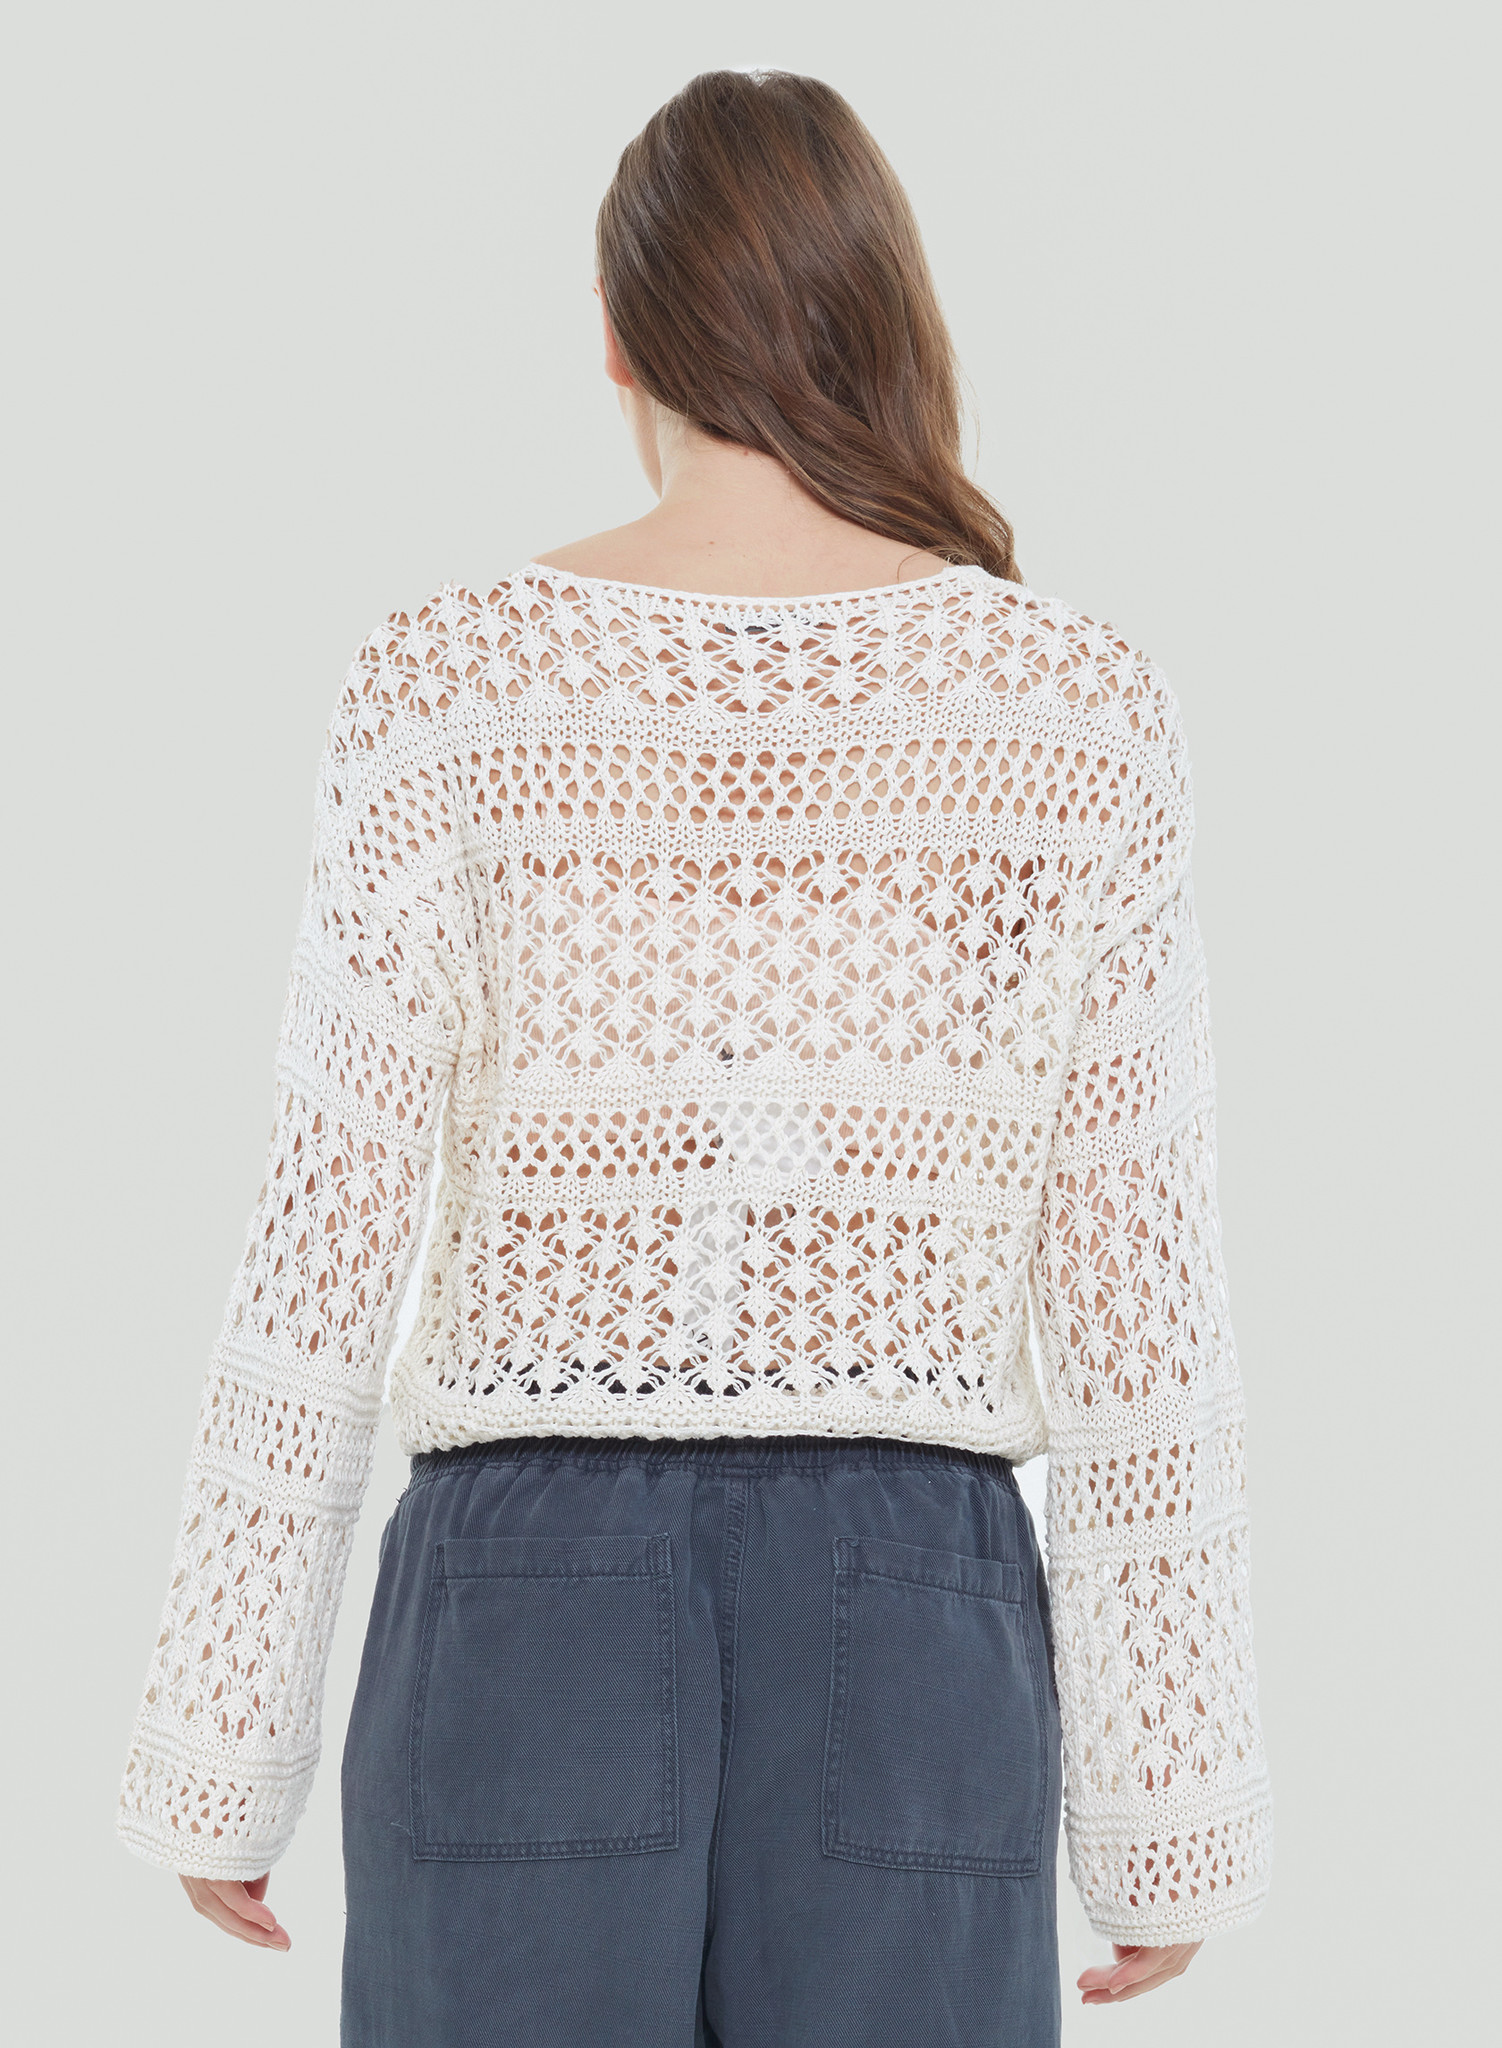 LACE UP CROCHET SWEATER